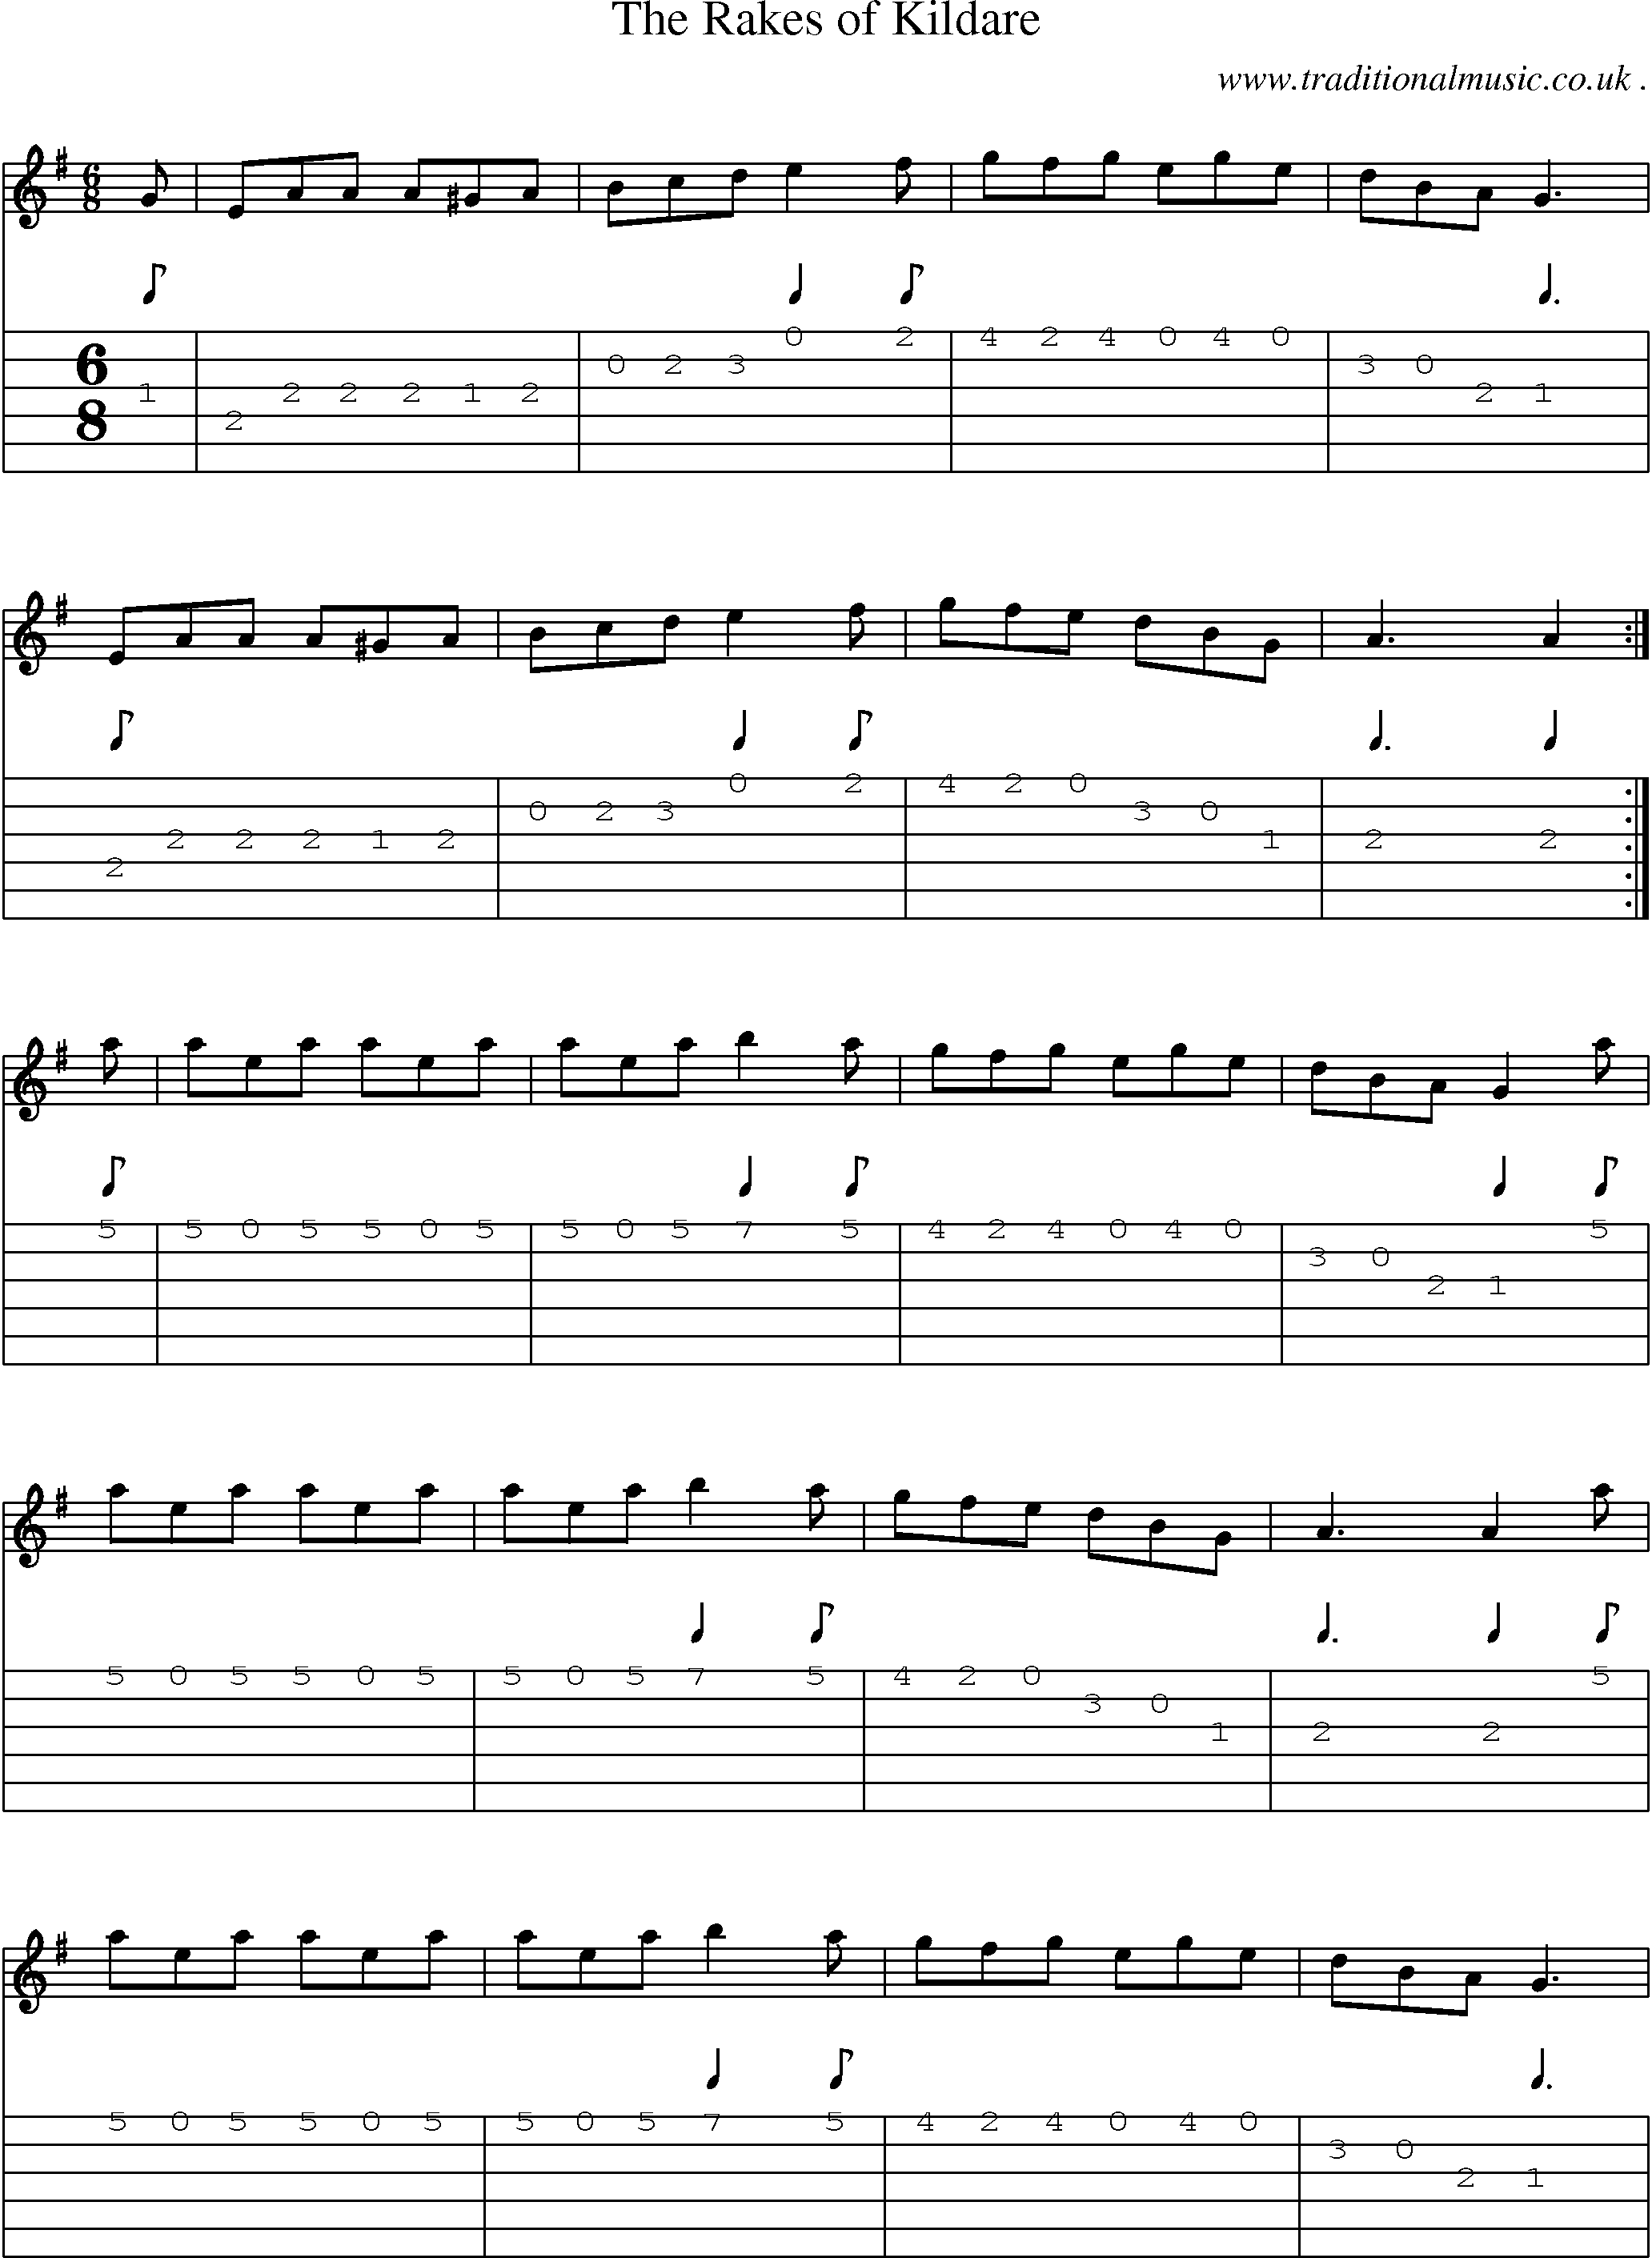 Sheet-Music and Guitar Tabs for The Rakes Of Kildare